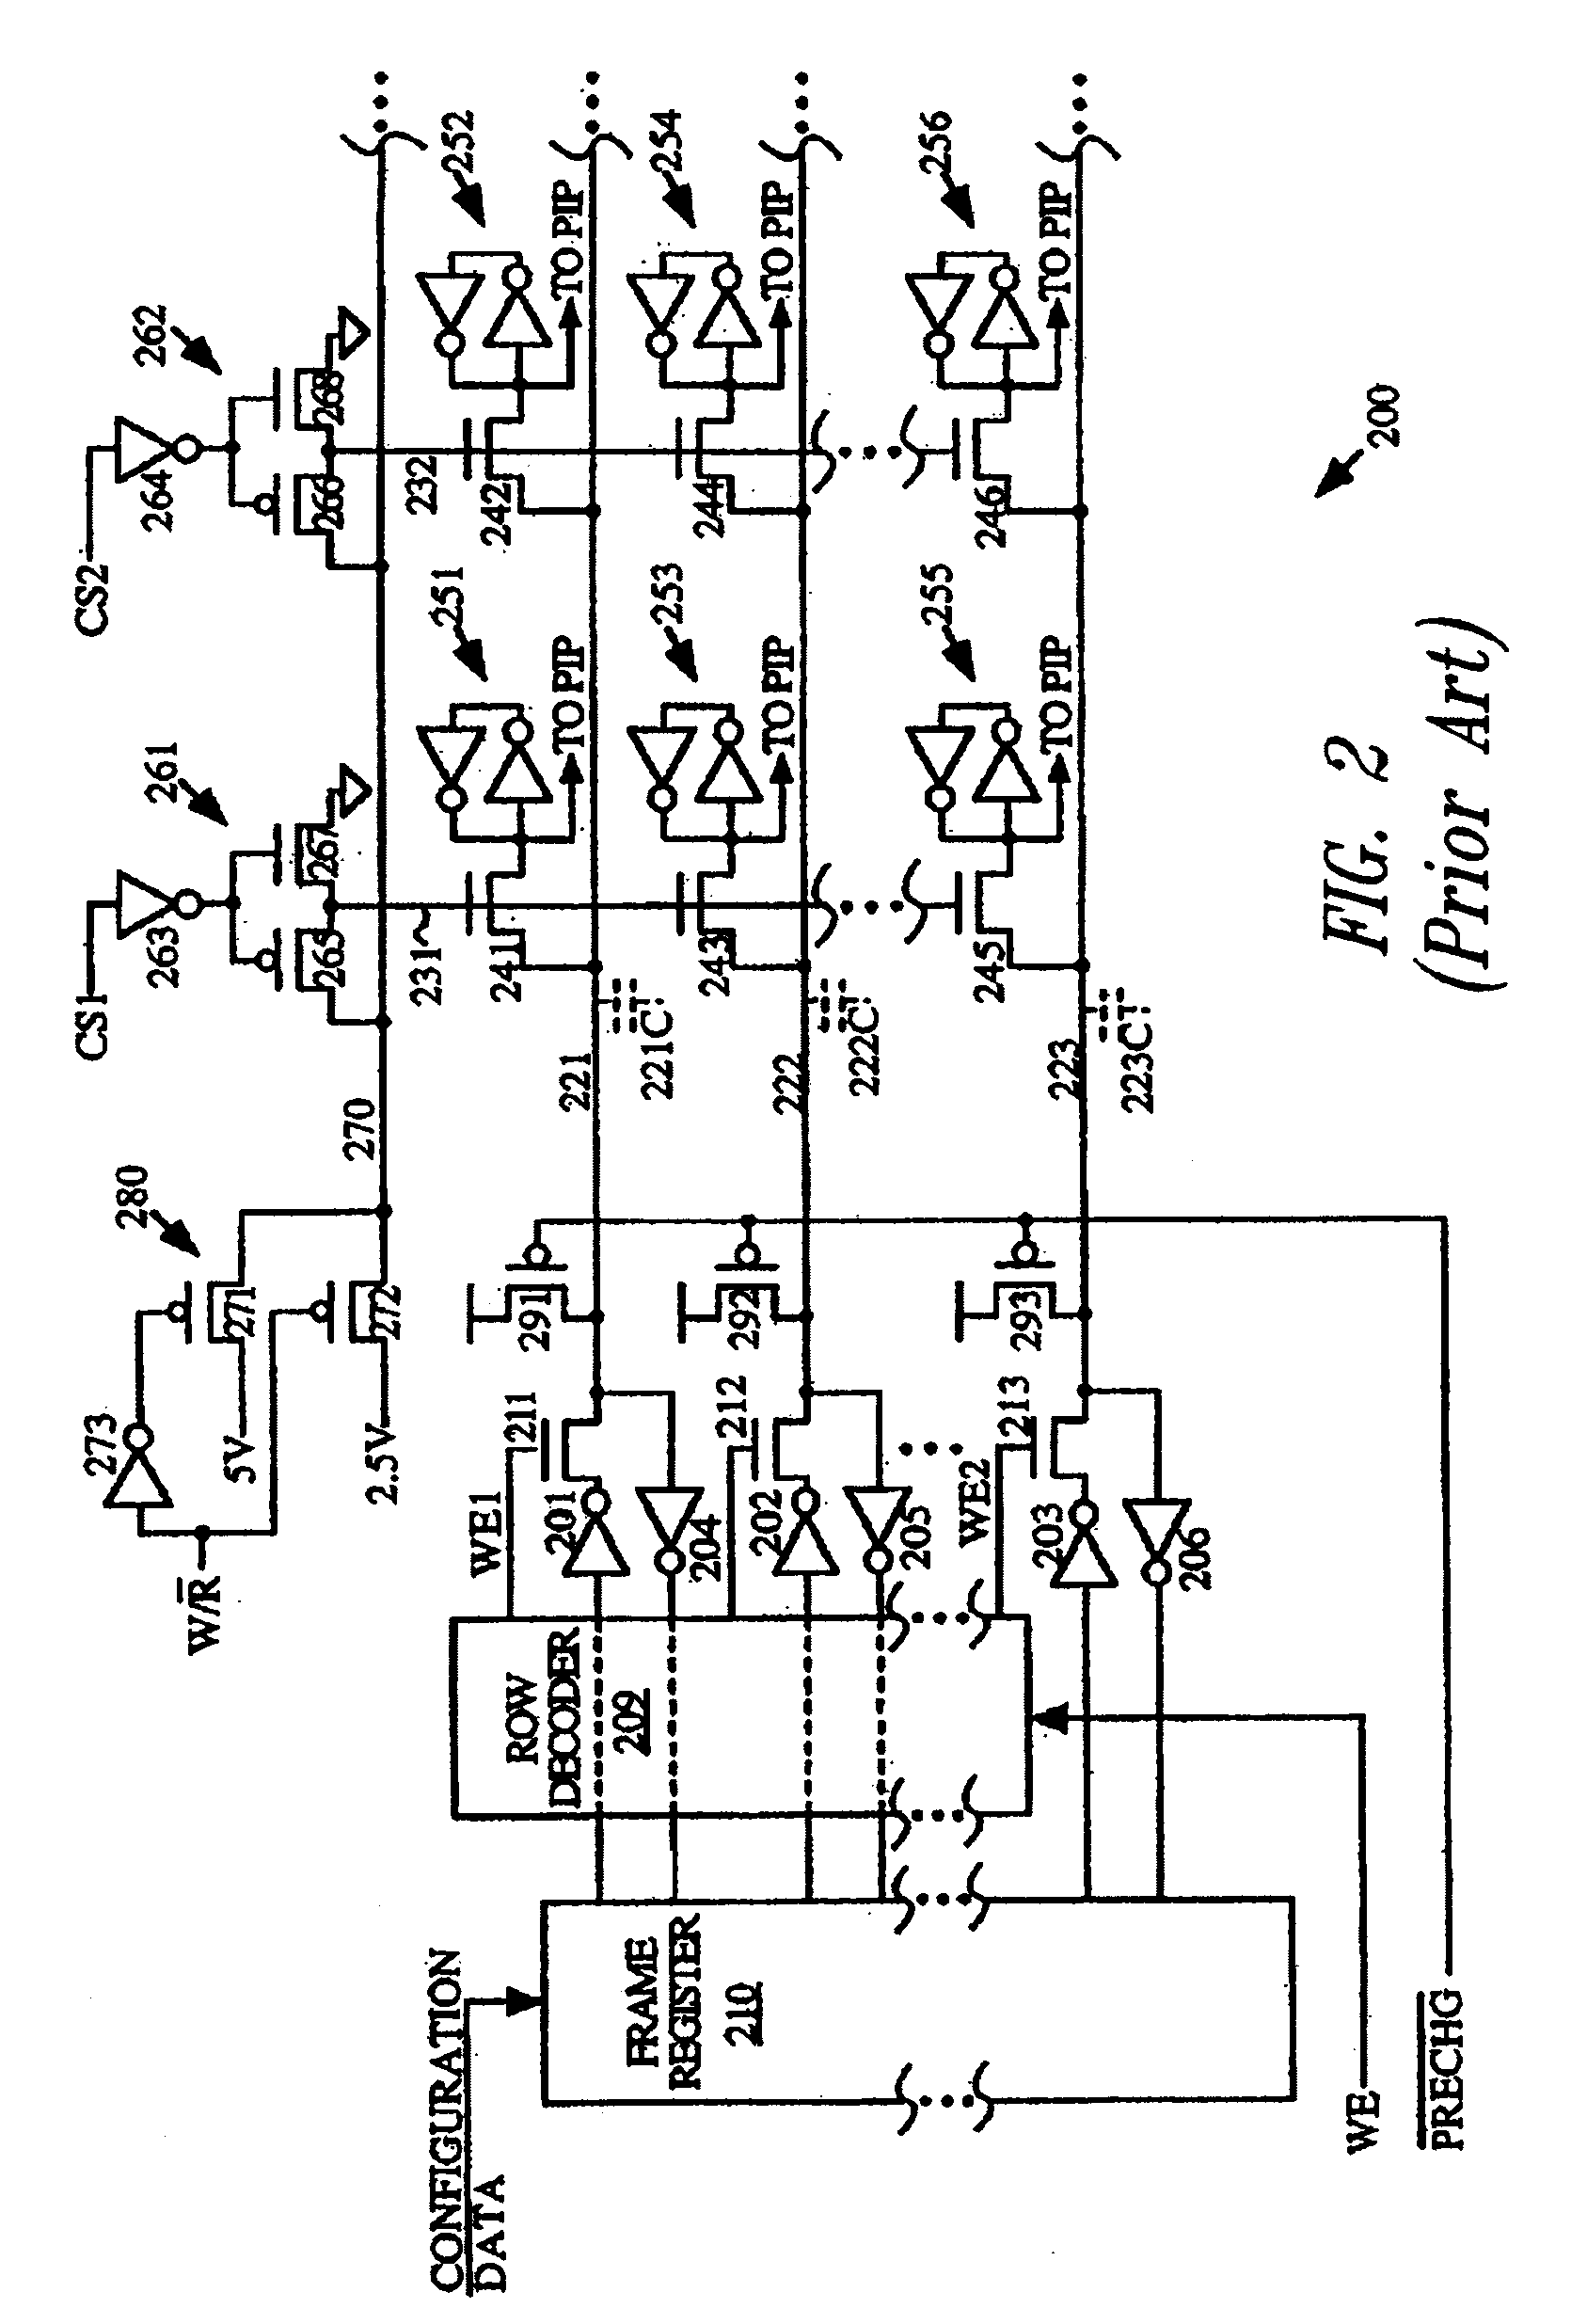 Configuration memory structure